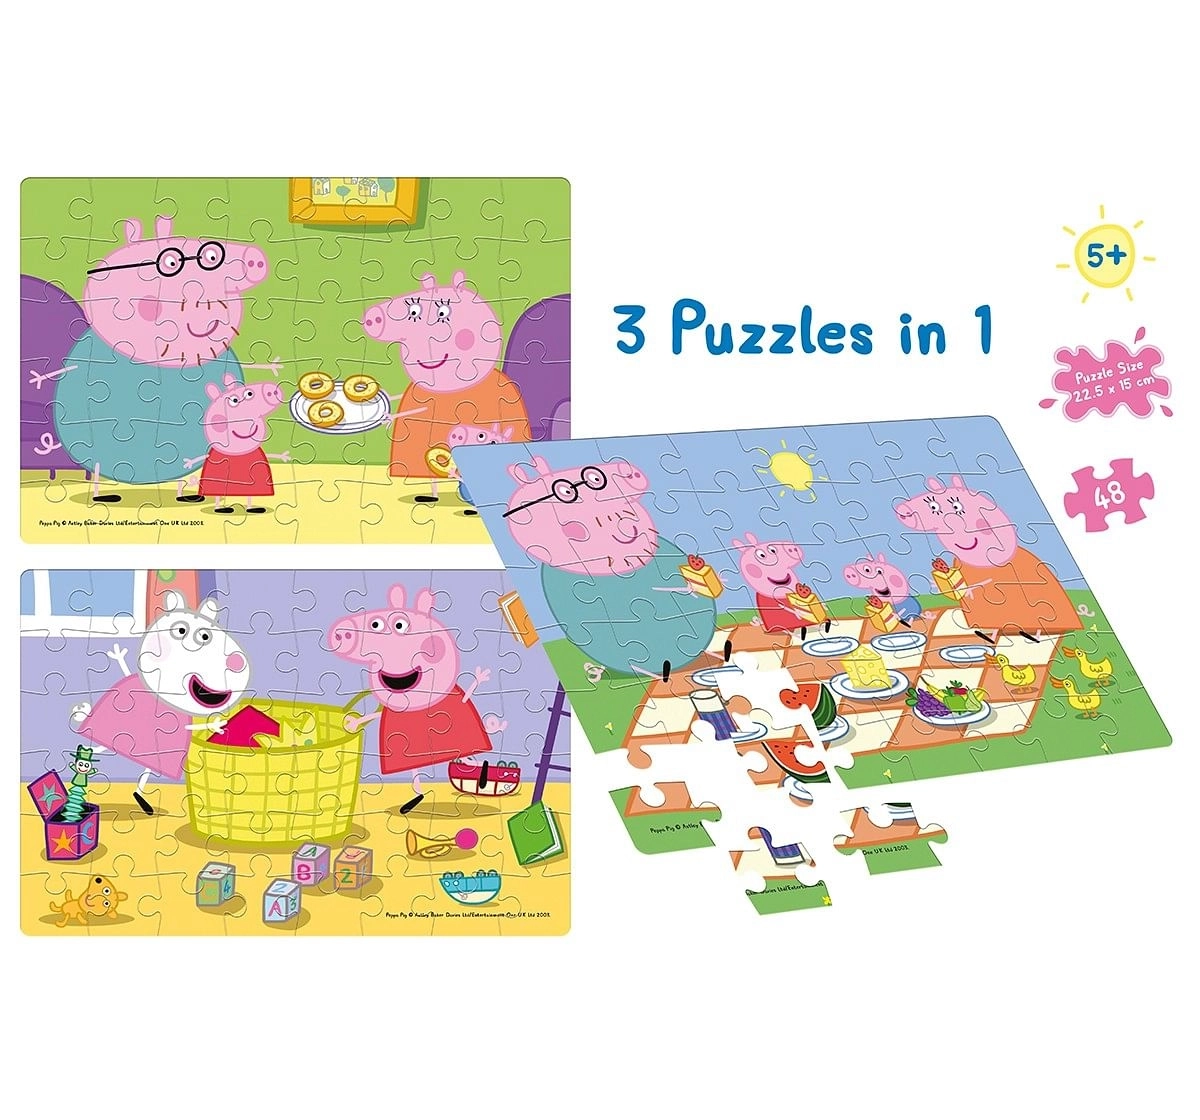 Frank Peppa Pig 3 In 1 Puzzle for Kids age 5Y+ 